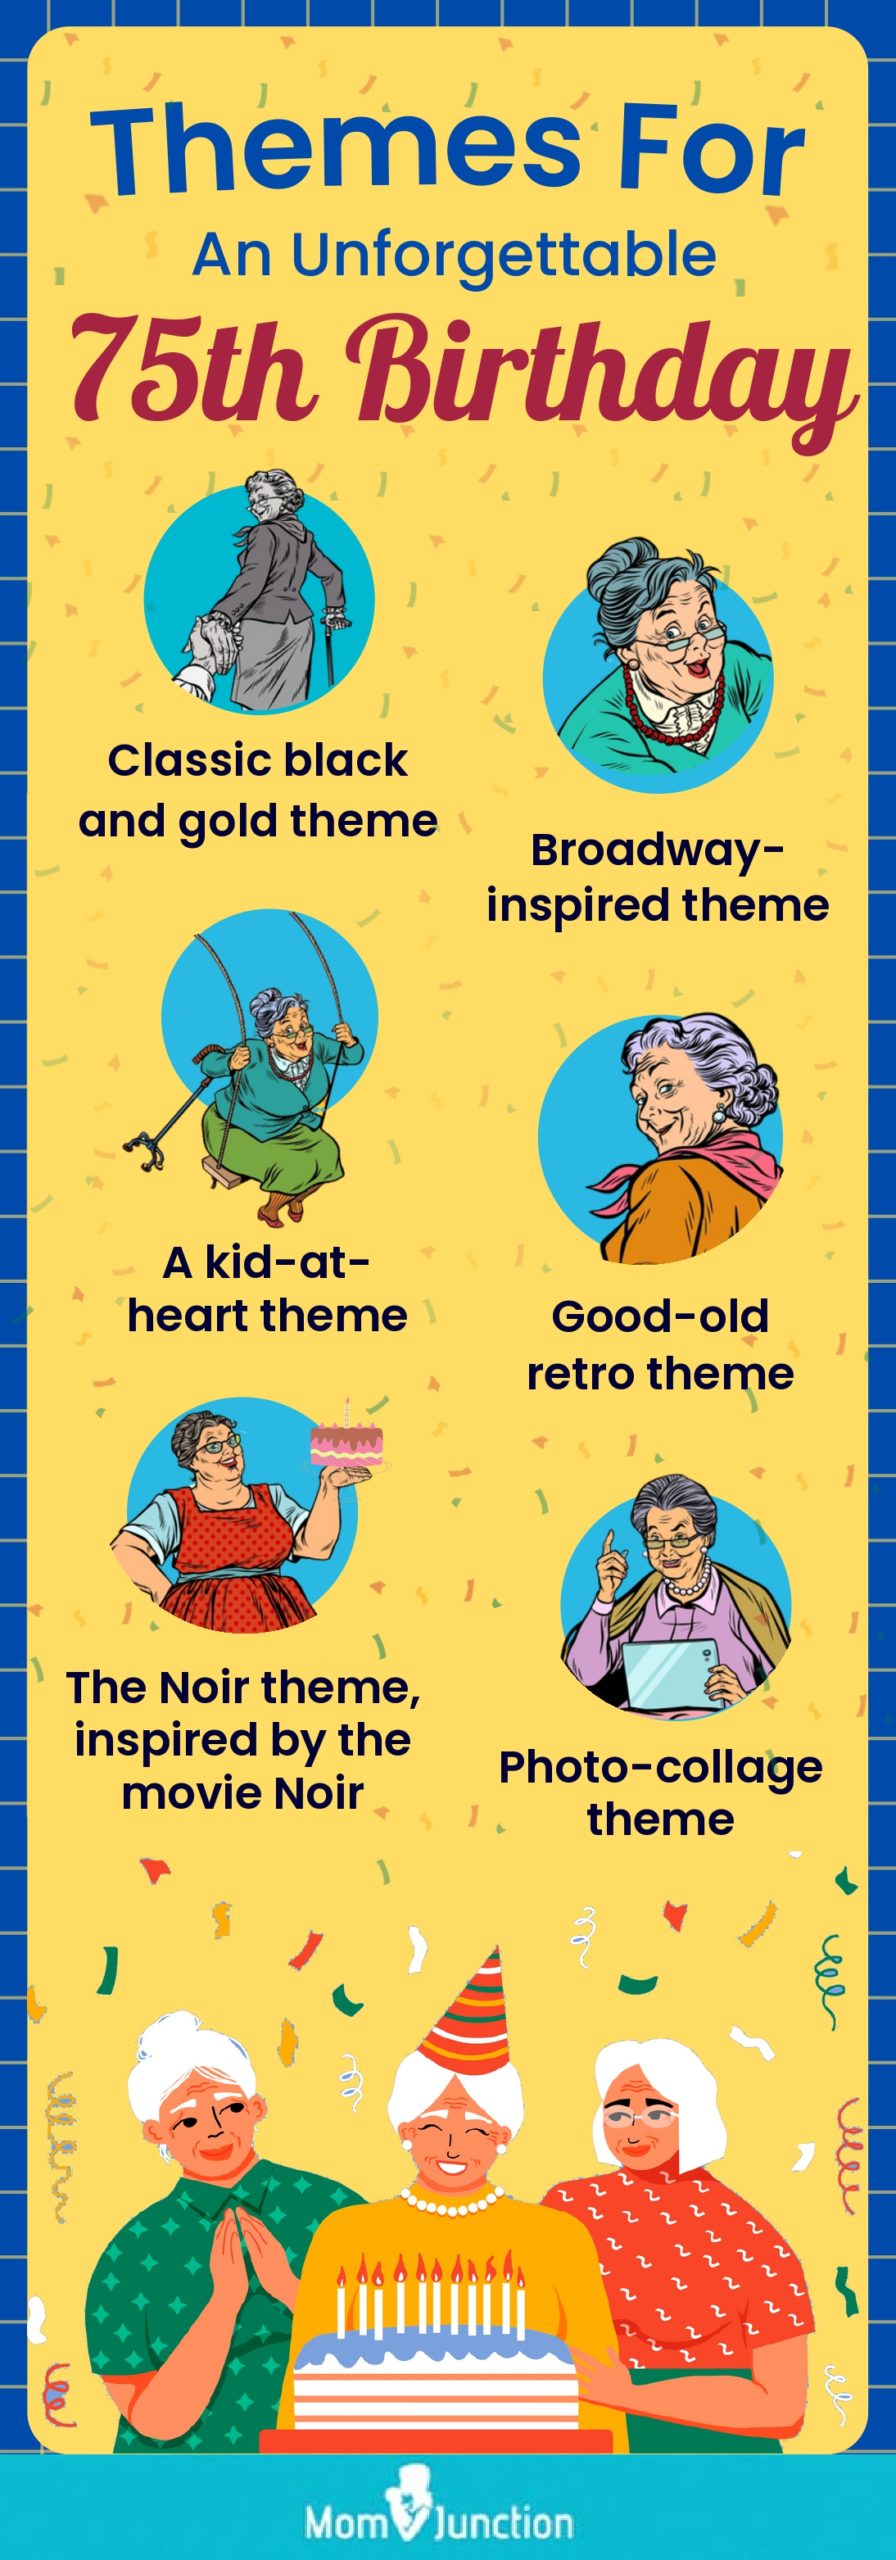 themes for an unforgettable 75th birthday (infographic)